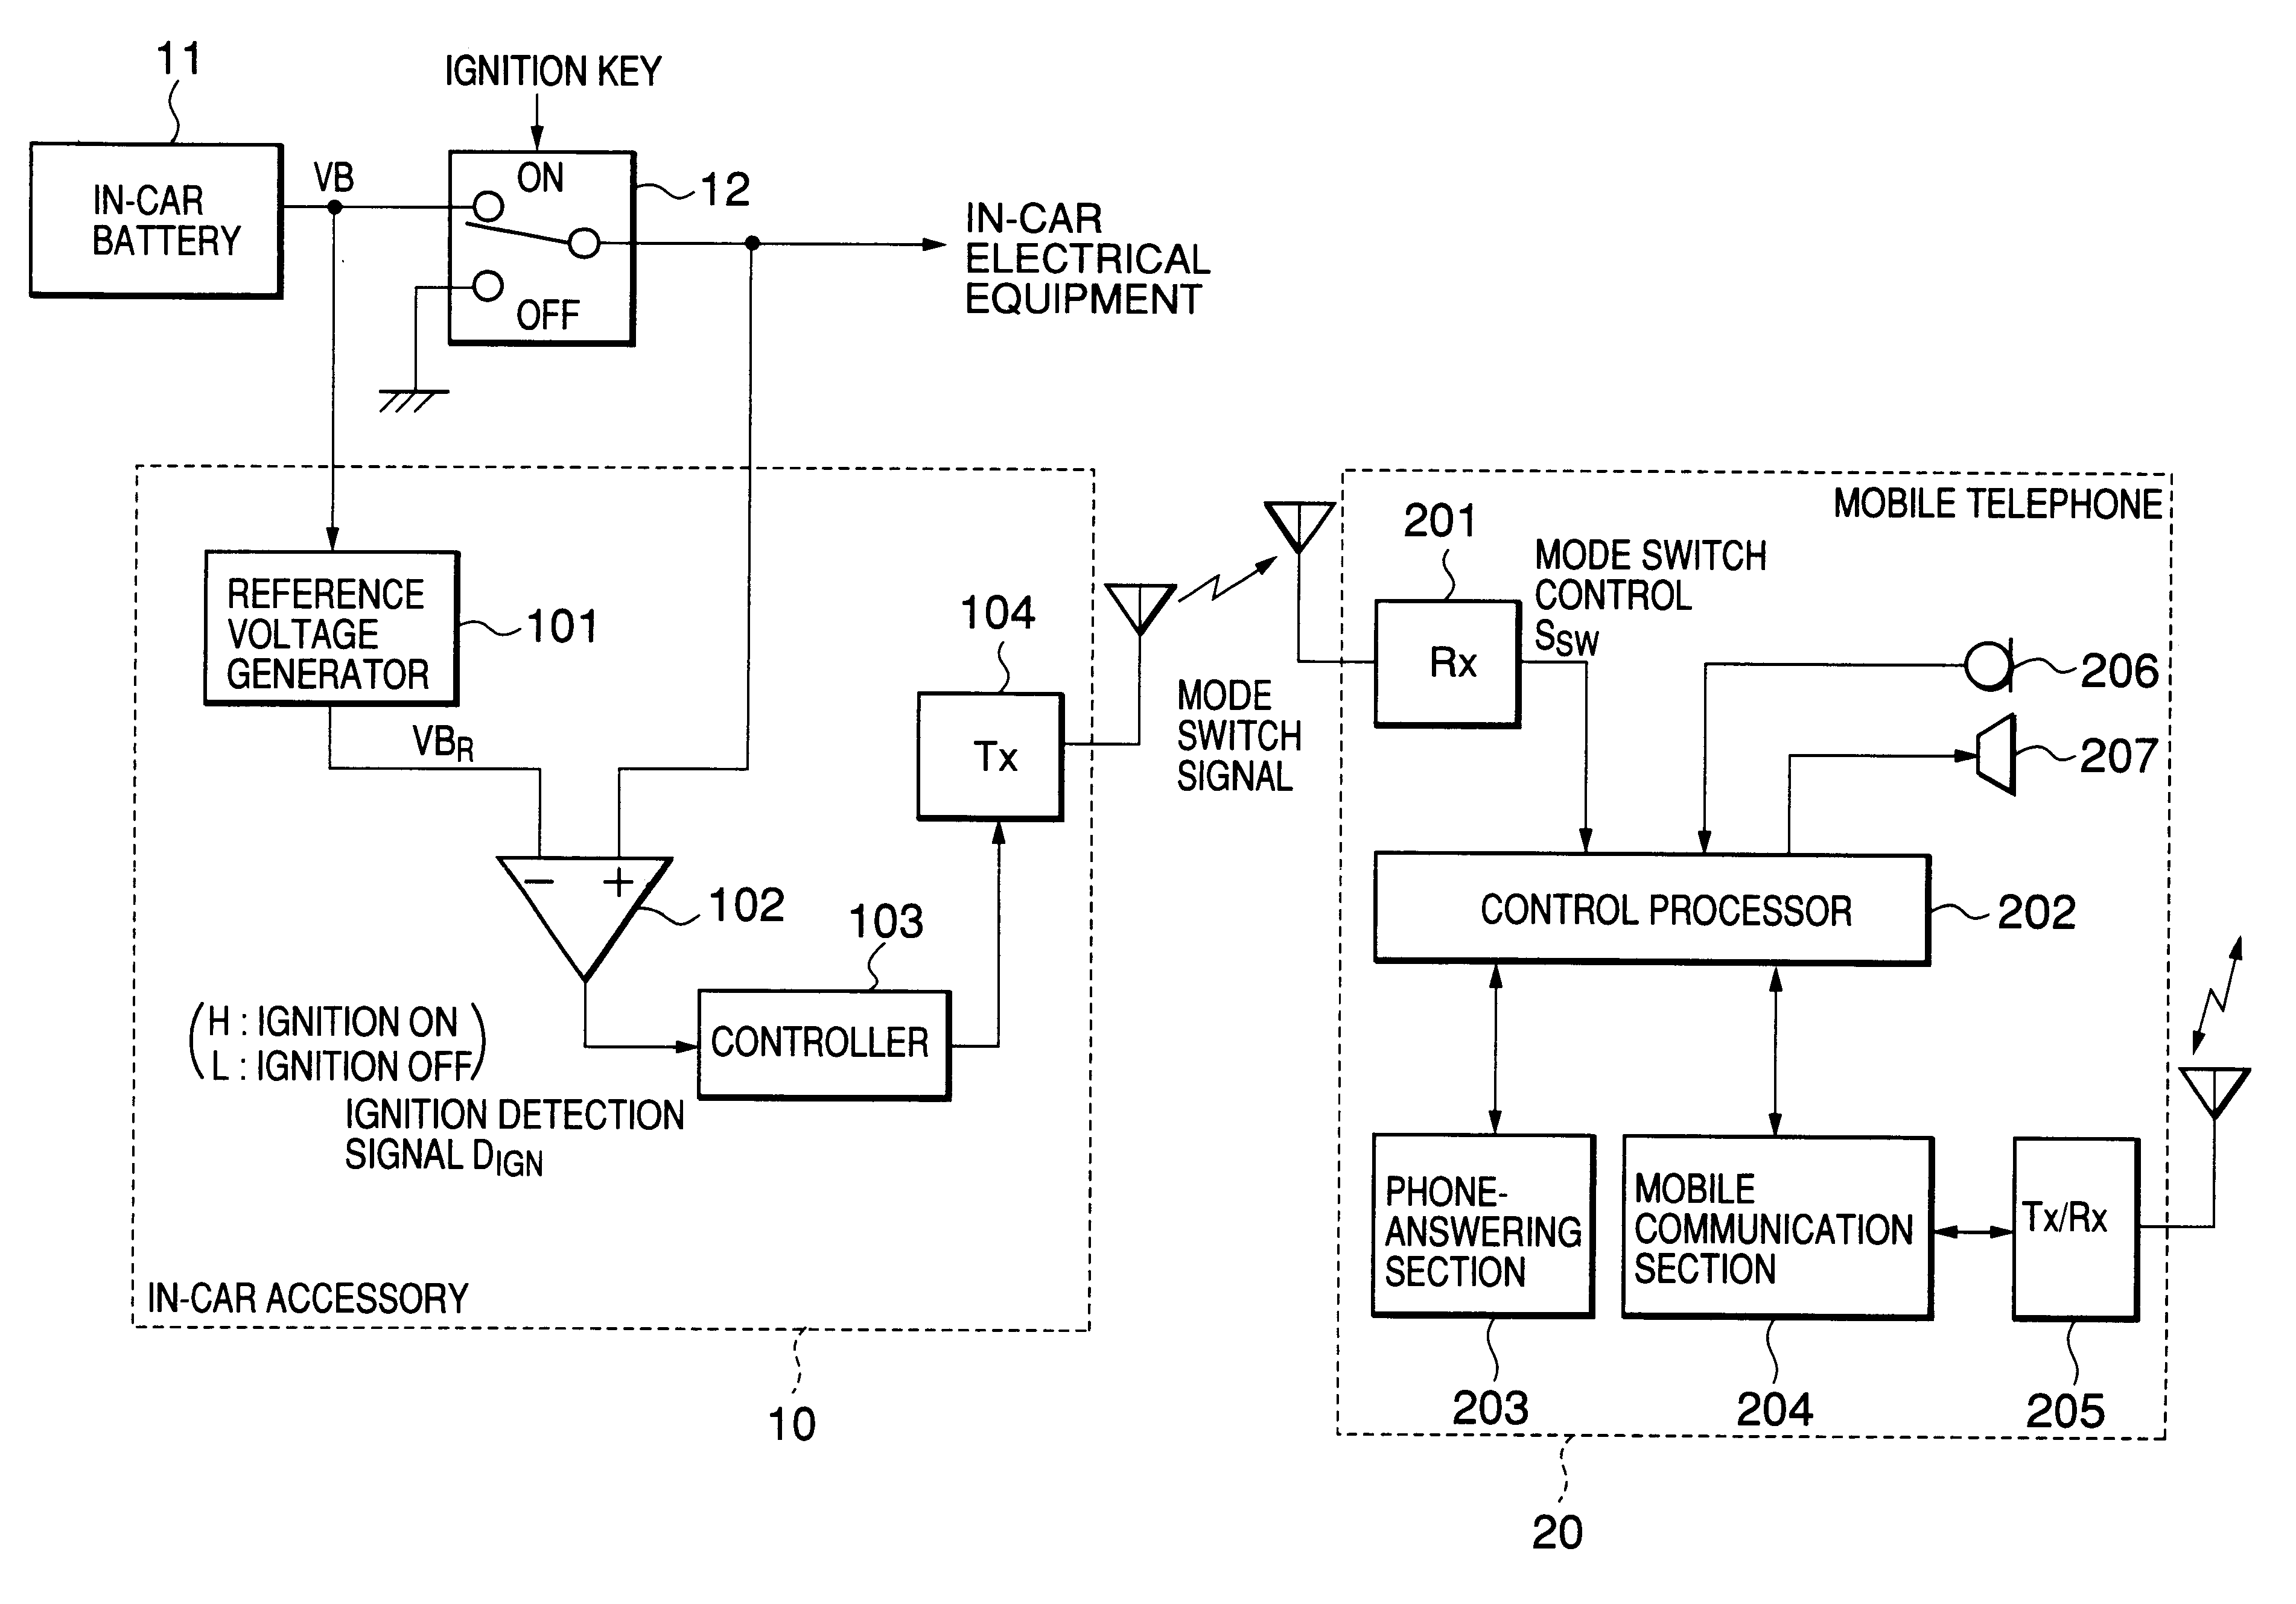 Radio telephone system within a vehicle with enhanced safety features